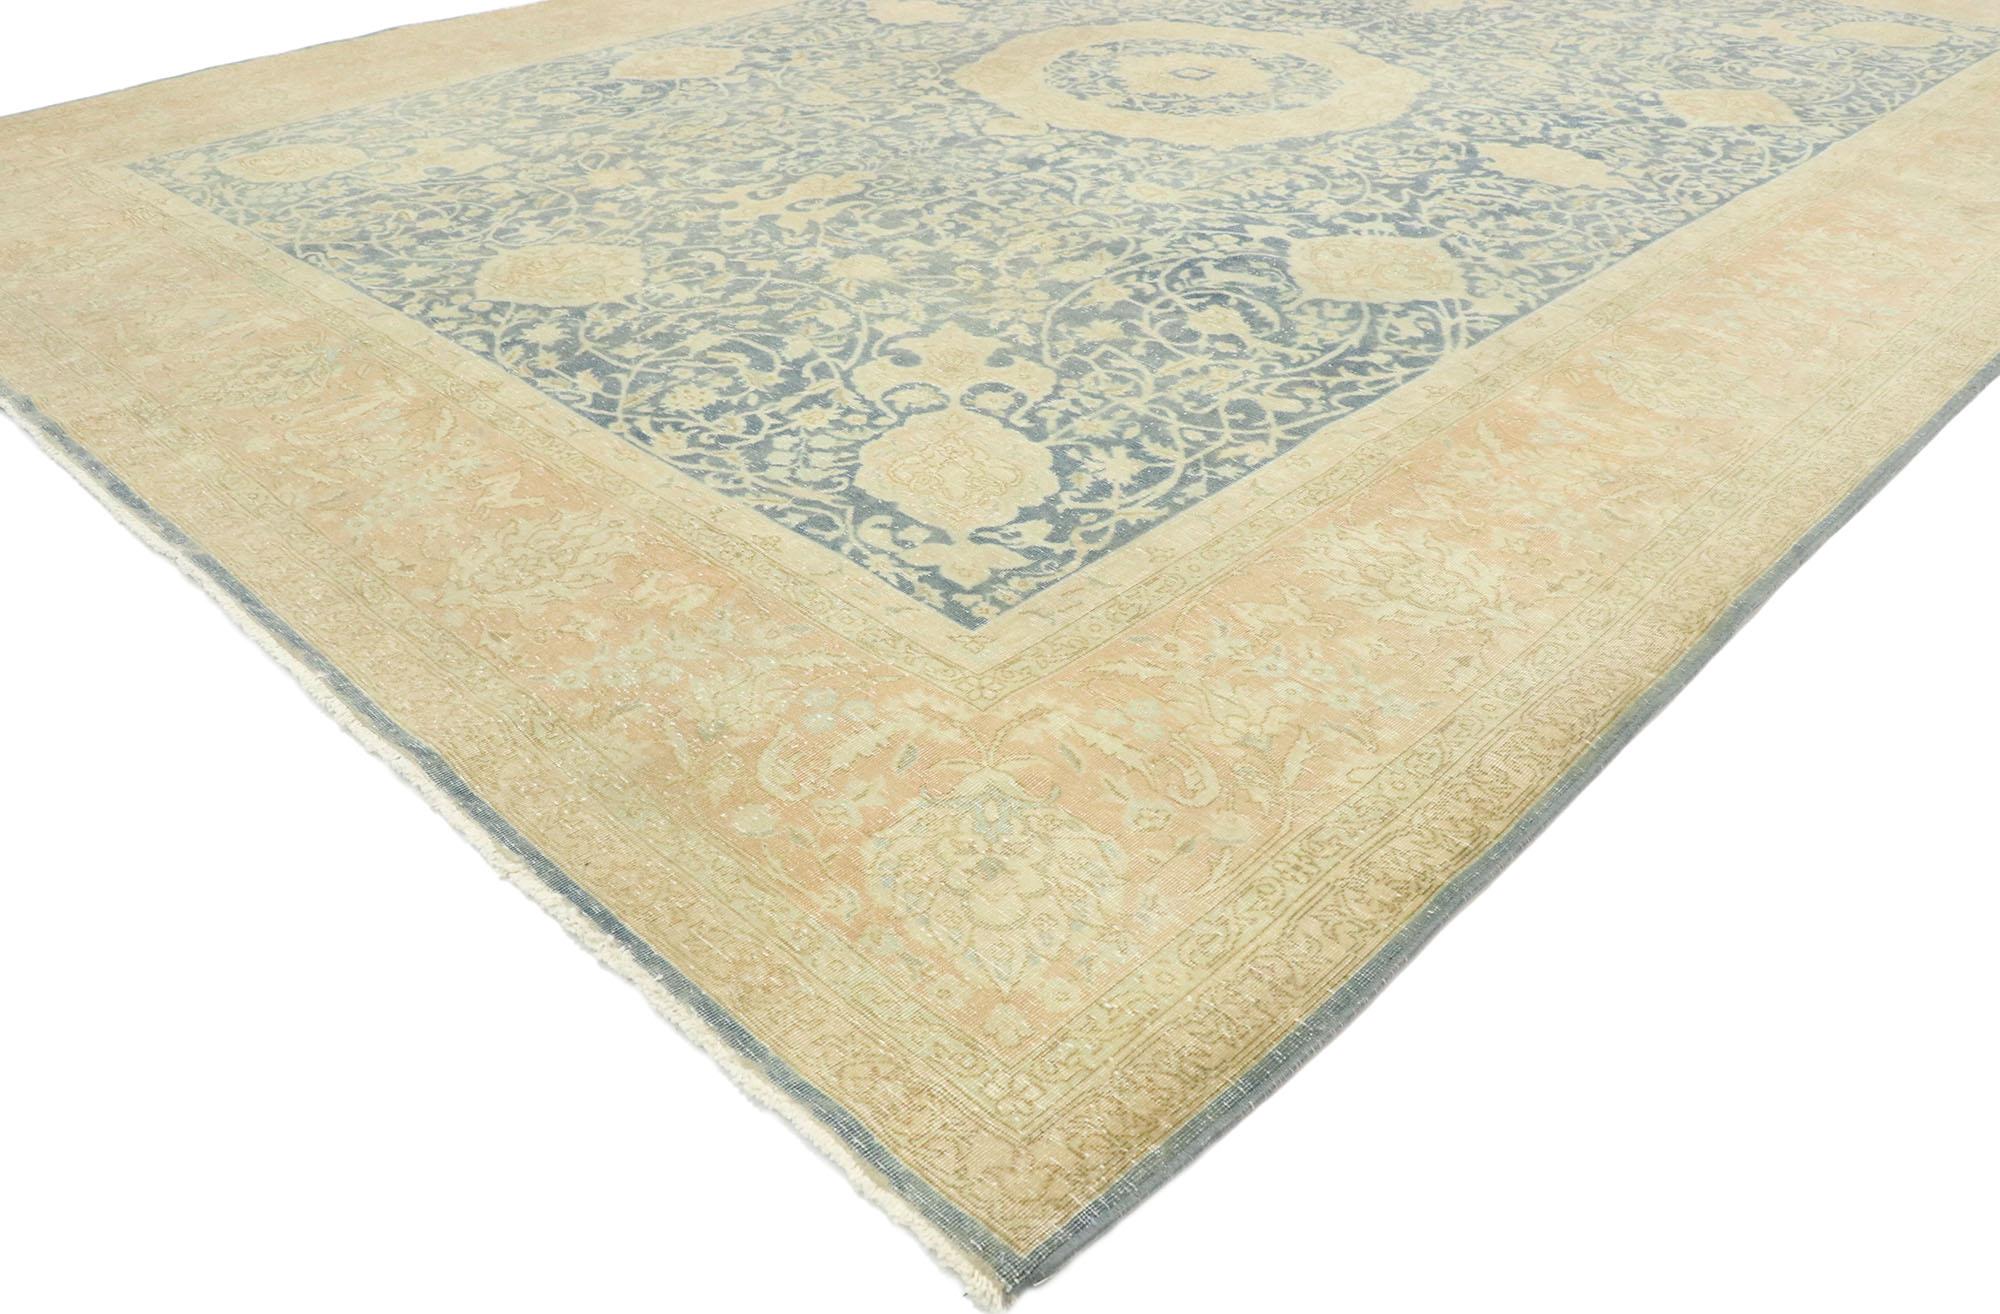 53175, distressed antique Persian Tabriz rug with English Chintz style. With a timeless design and traditional feel, this hand knotted wool distressed antique Persian Tabriz rug beautifully embodies English Chintz style. Taking center stage is a